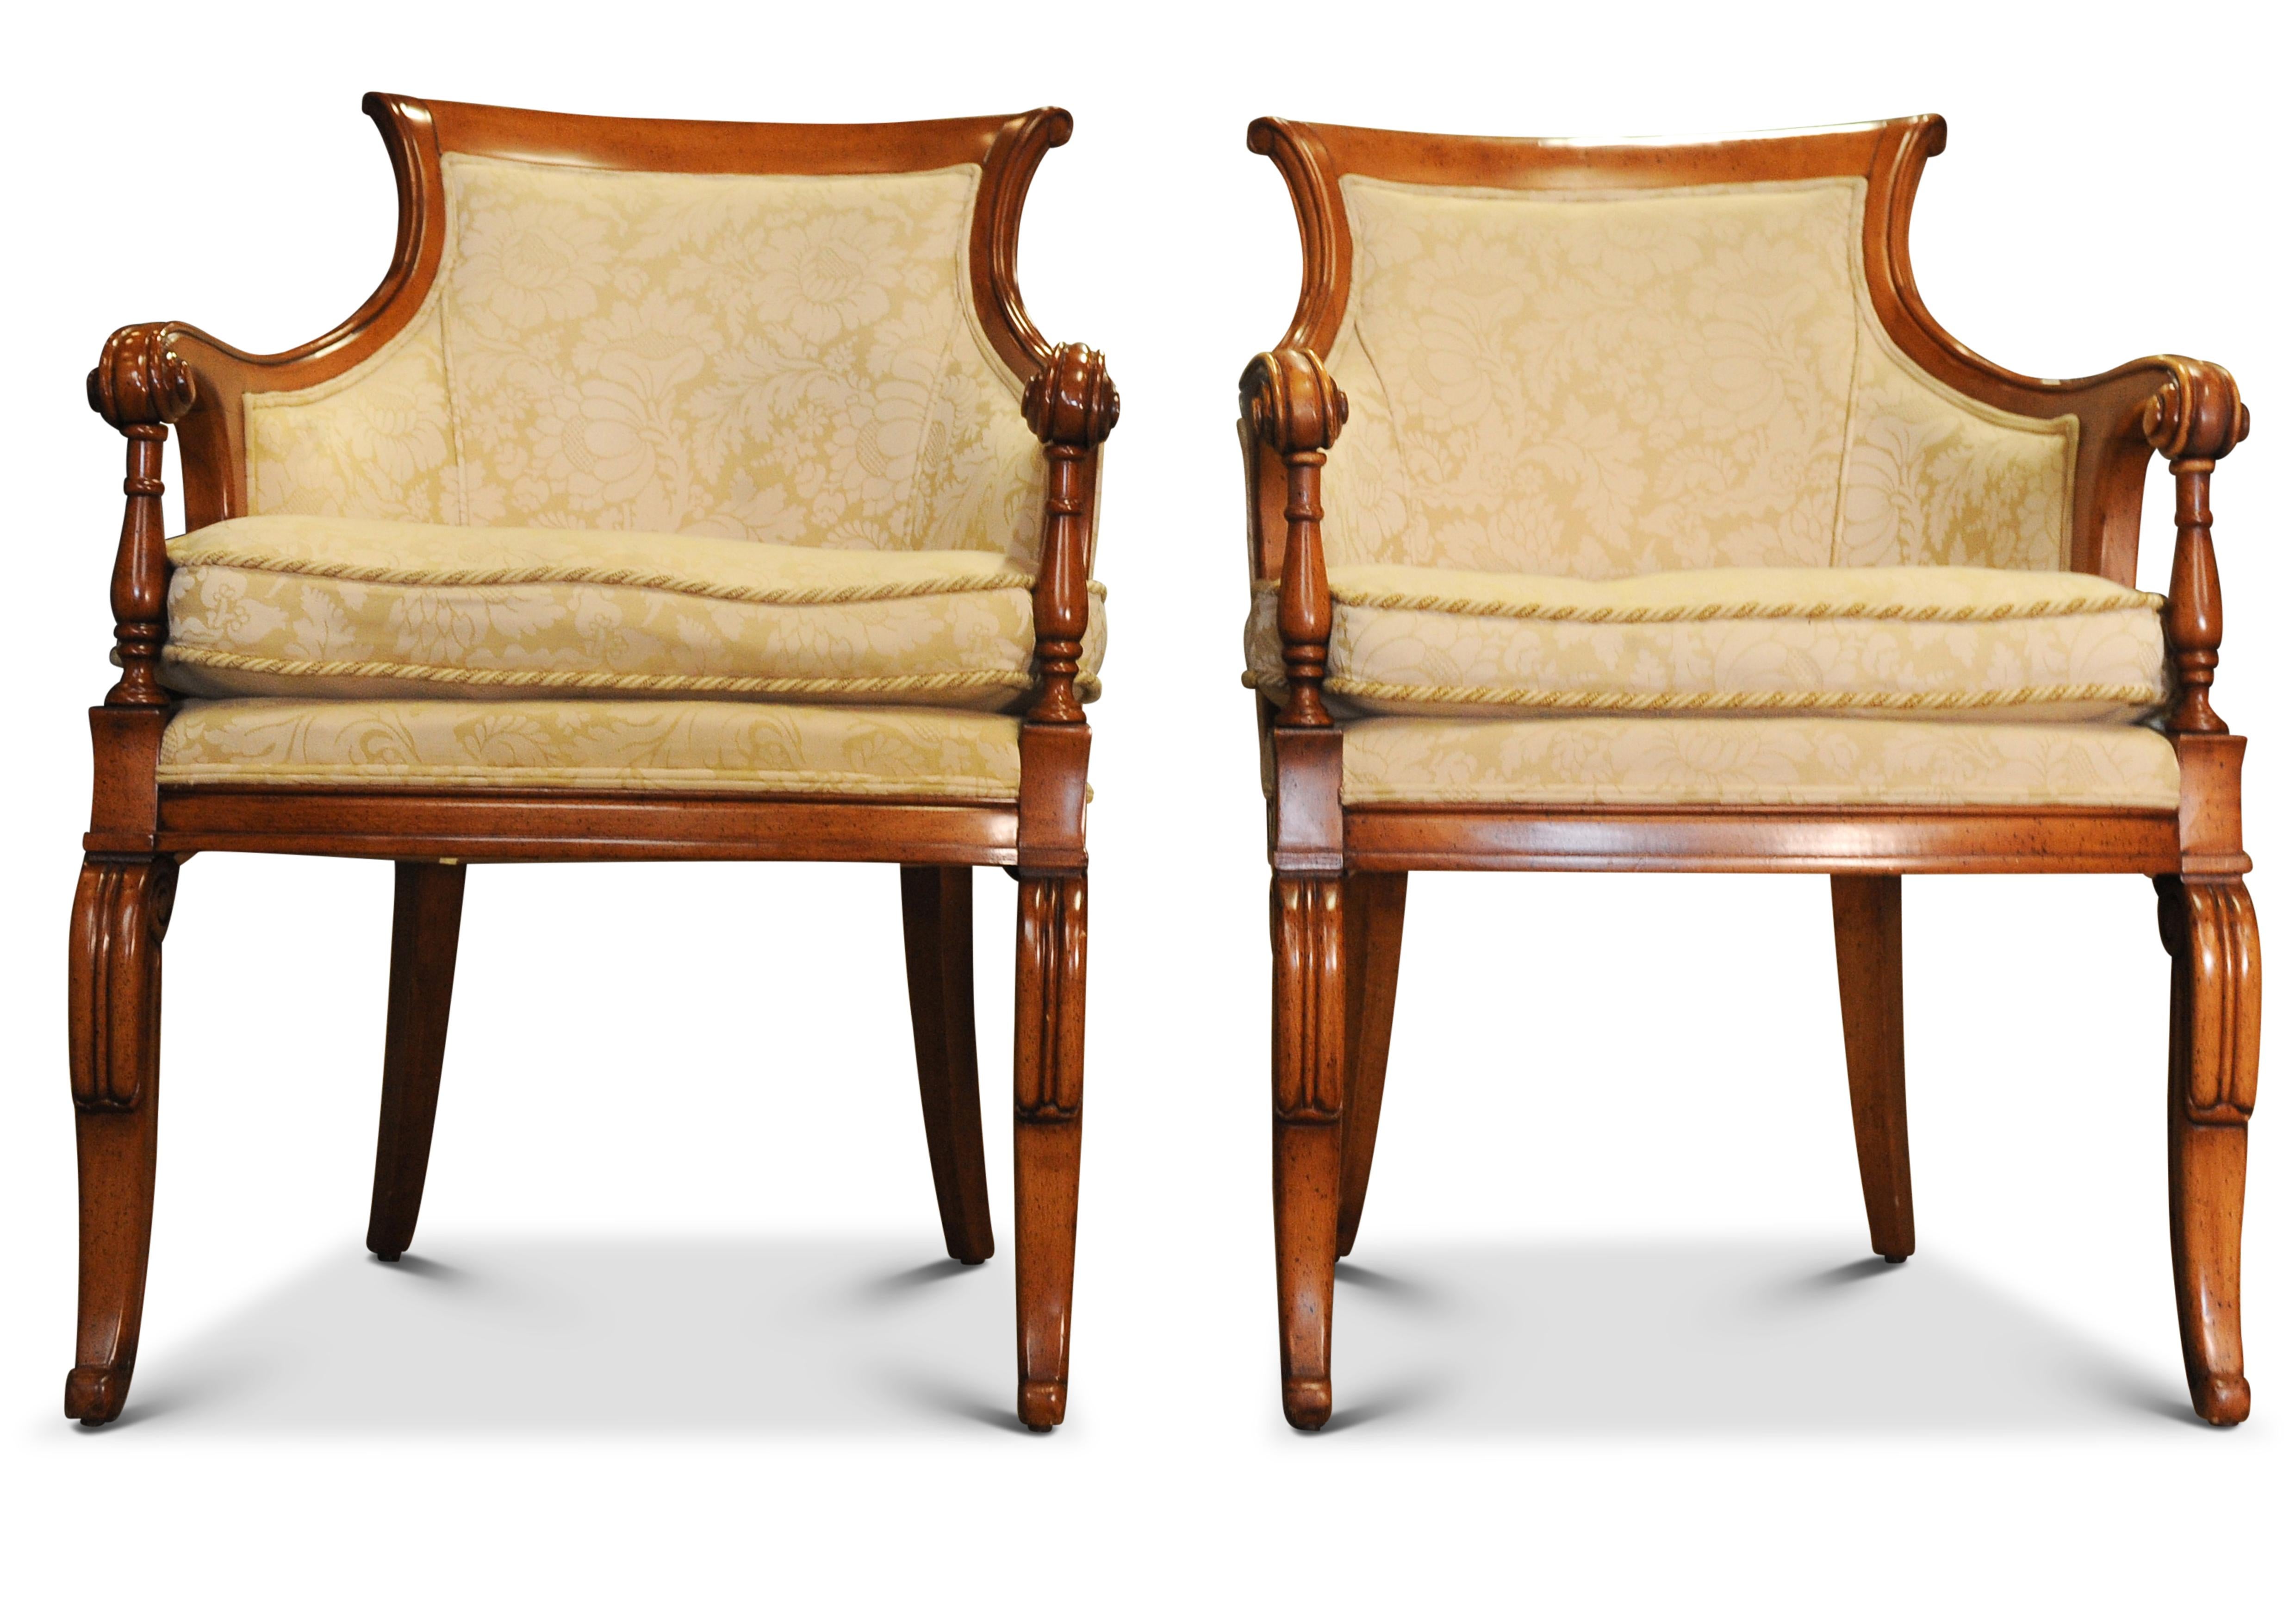 Elegant Matching Pair of 20th Century William IV Design Bergere Arm Chairs With Scroll Backs Upholstered in Cream Damask. Perfect For Any Library, Study or Lounge Space.

Height to arms 67.5cm
Height to seat 54cm

Width of seat 52cm at front 35cm at